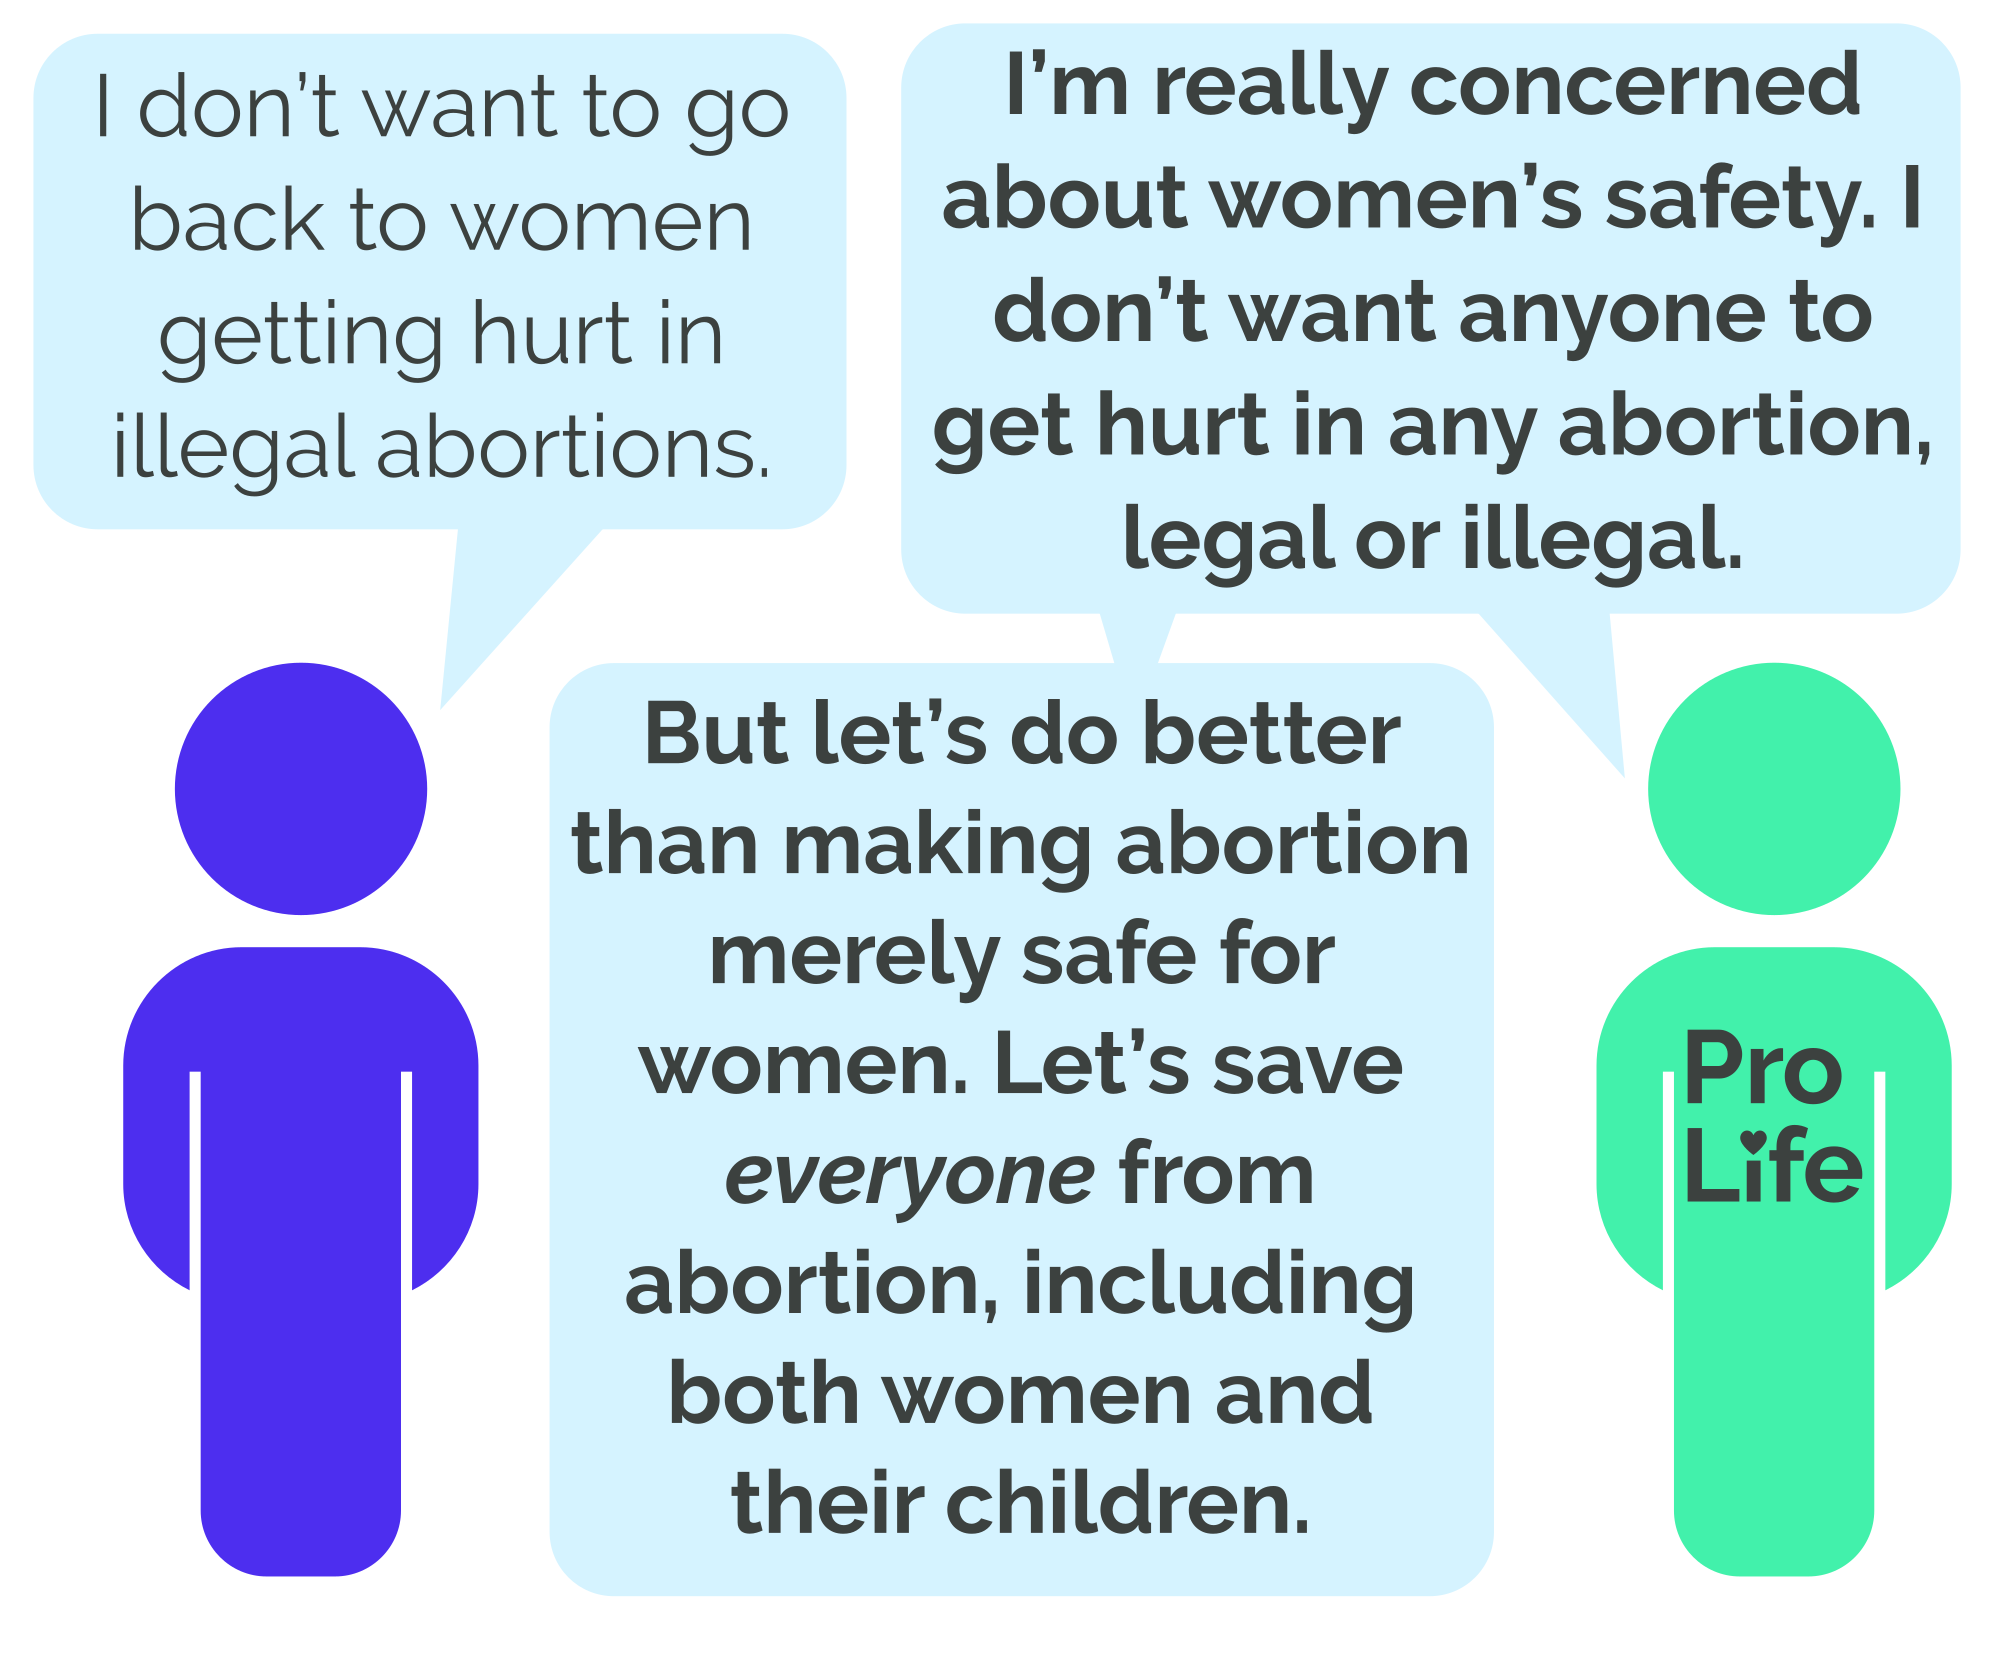 Person 1: I don’t want to go back to women getting hurt in illegal abortions. Person 2 (our hero): I’m really concerned about women’s safety. I don’t want anyone to get hurt in any abortion, legal or illegal. But let’s do better than making abortion merely safe for women. Let’s save *everyone* from abortion, including both women and their children.